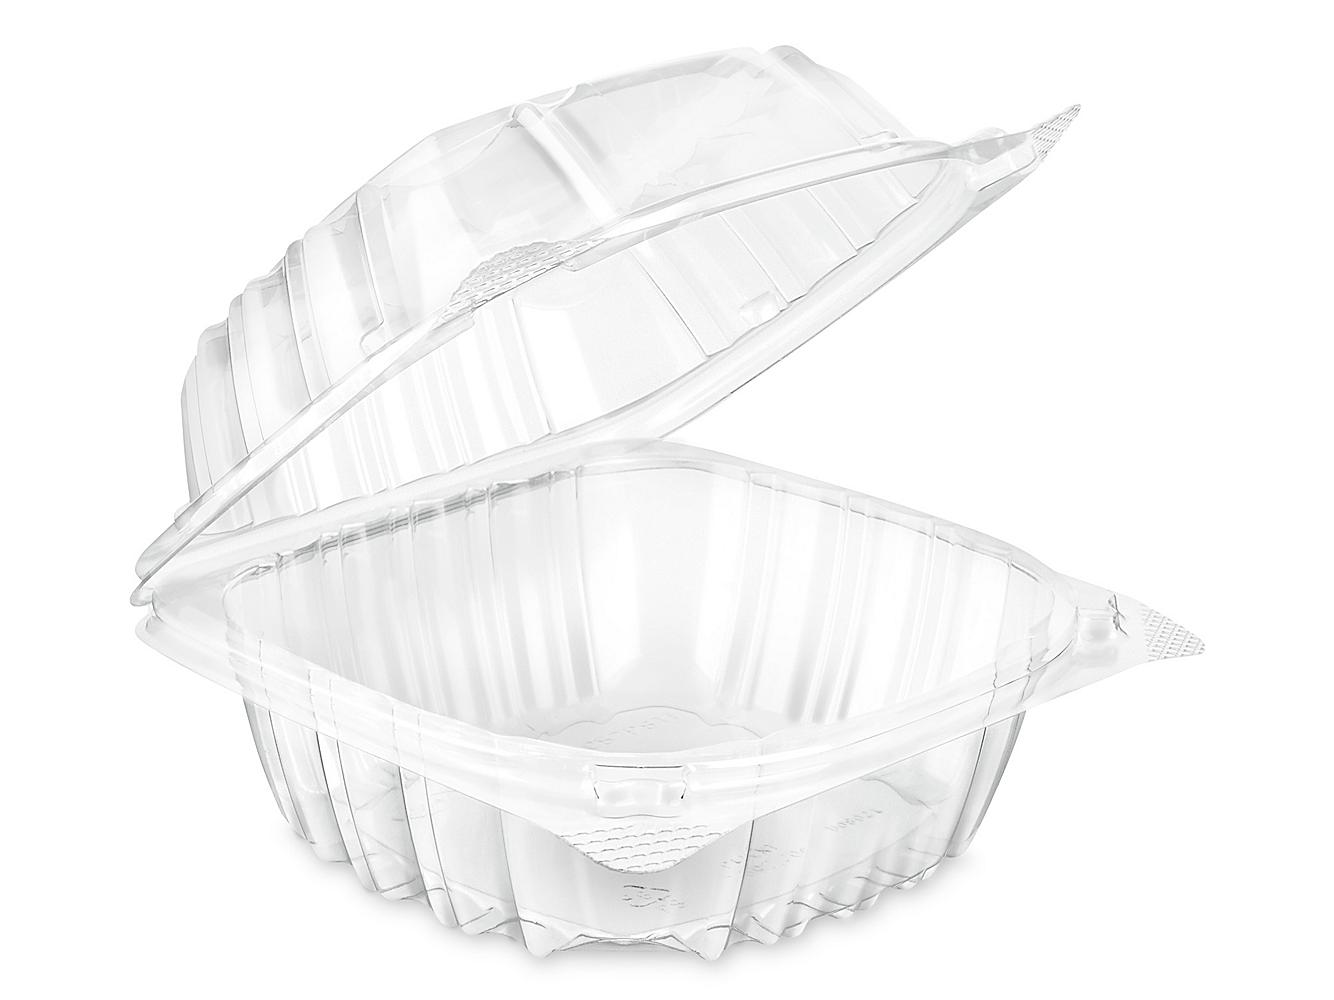 Clear Hinged Take-Out Containers - 20 oz